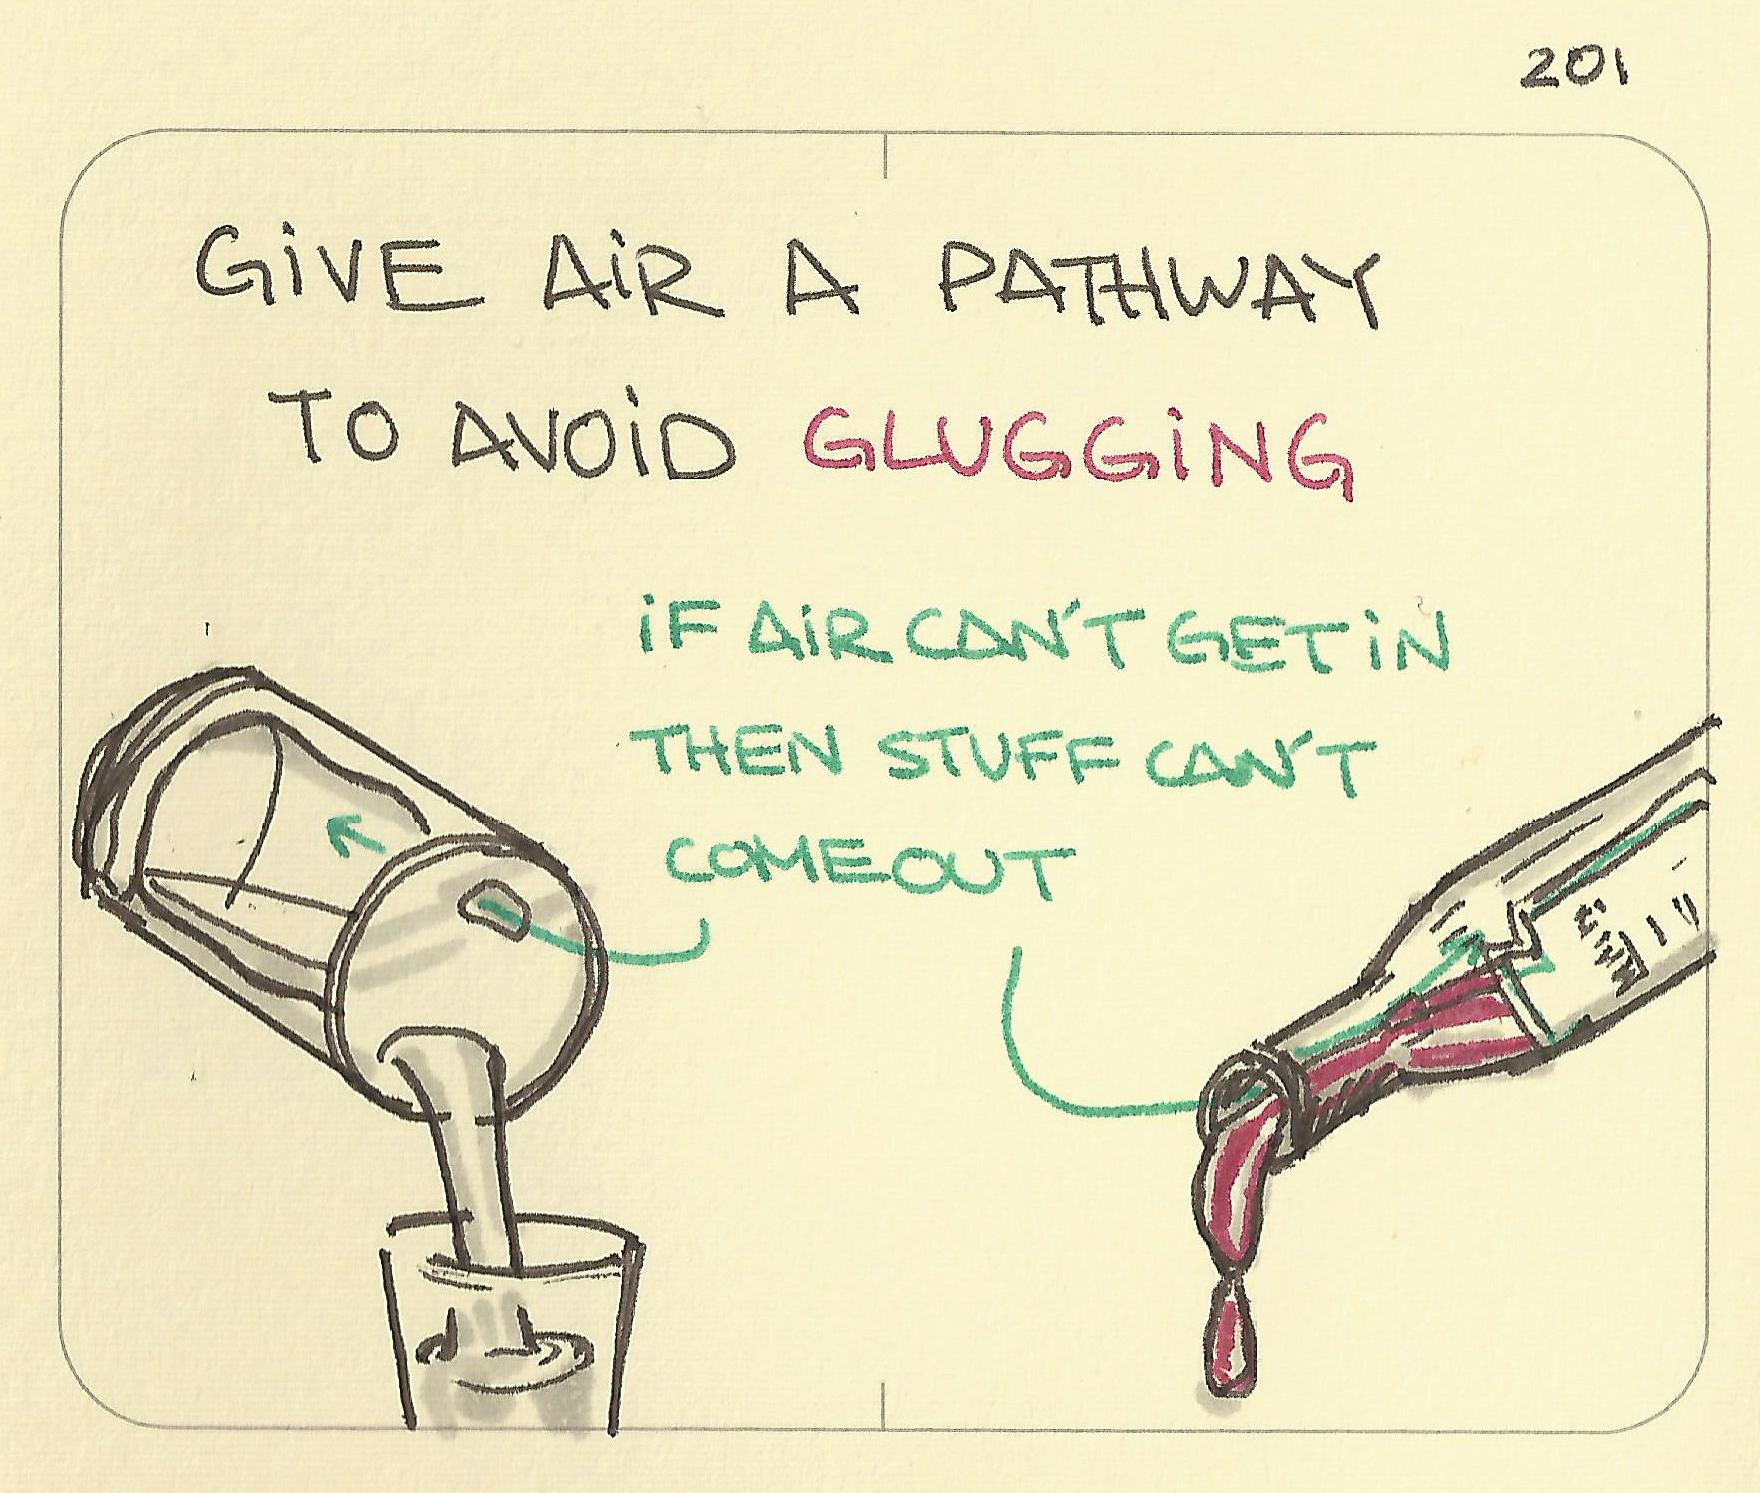 Give air a pathway to avoid glugging - Sketchplanations